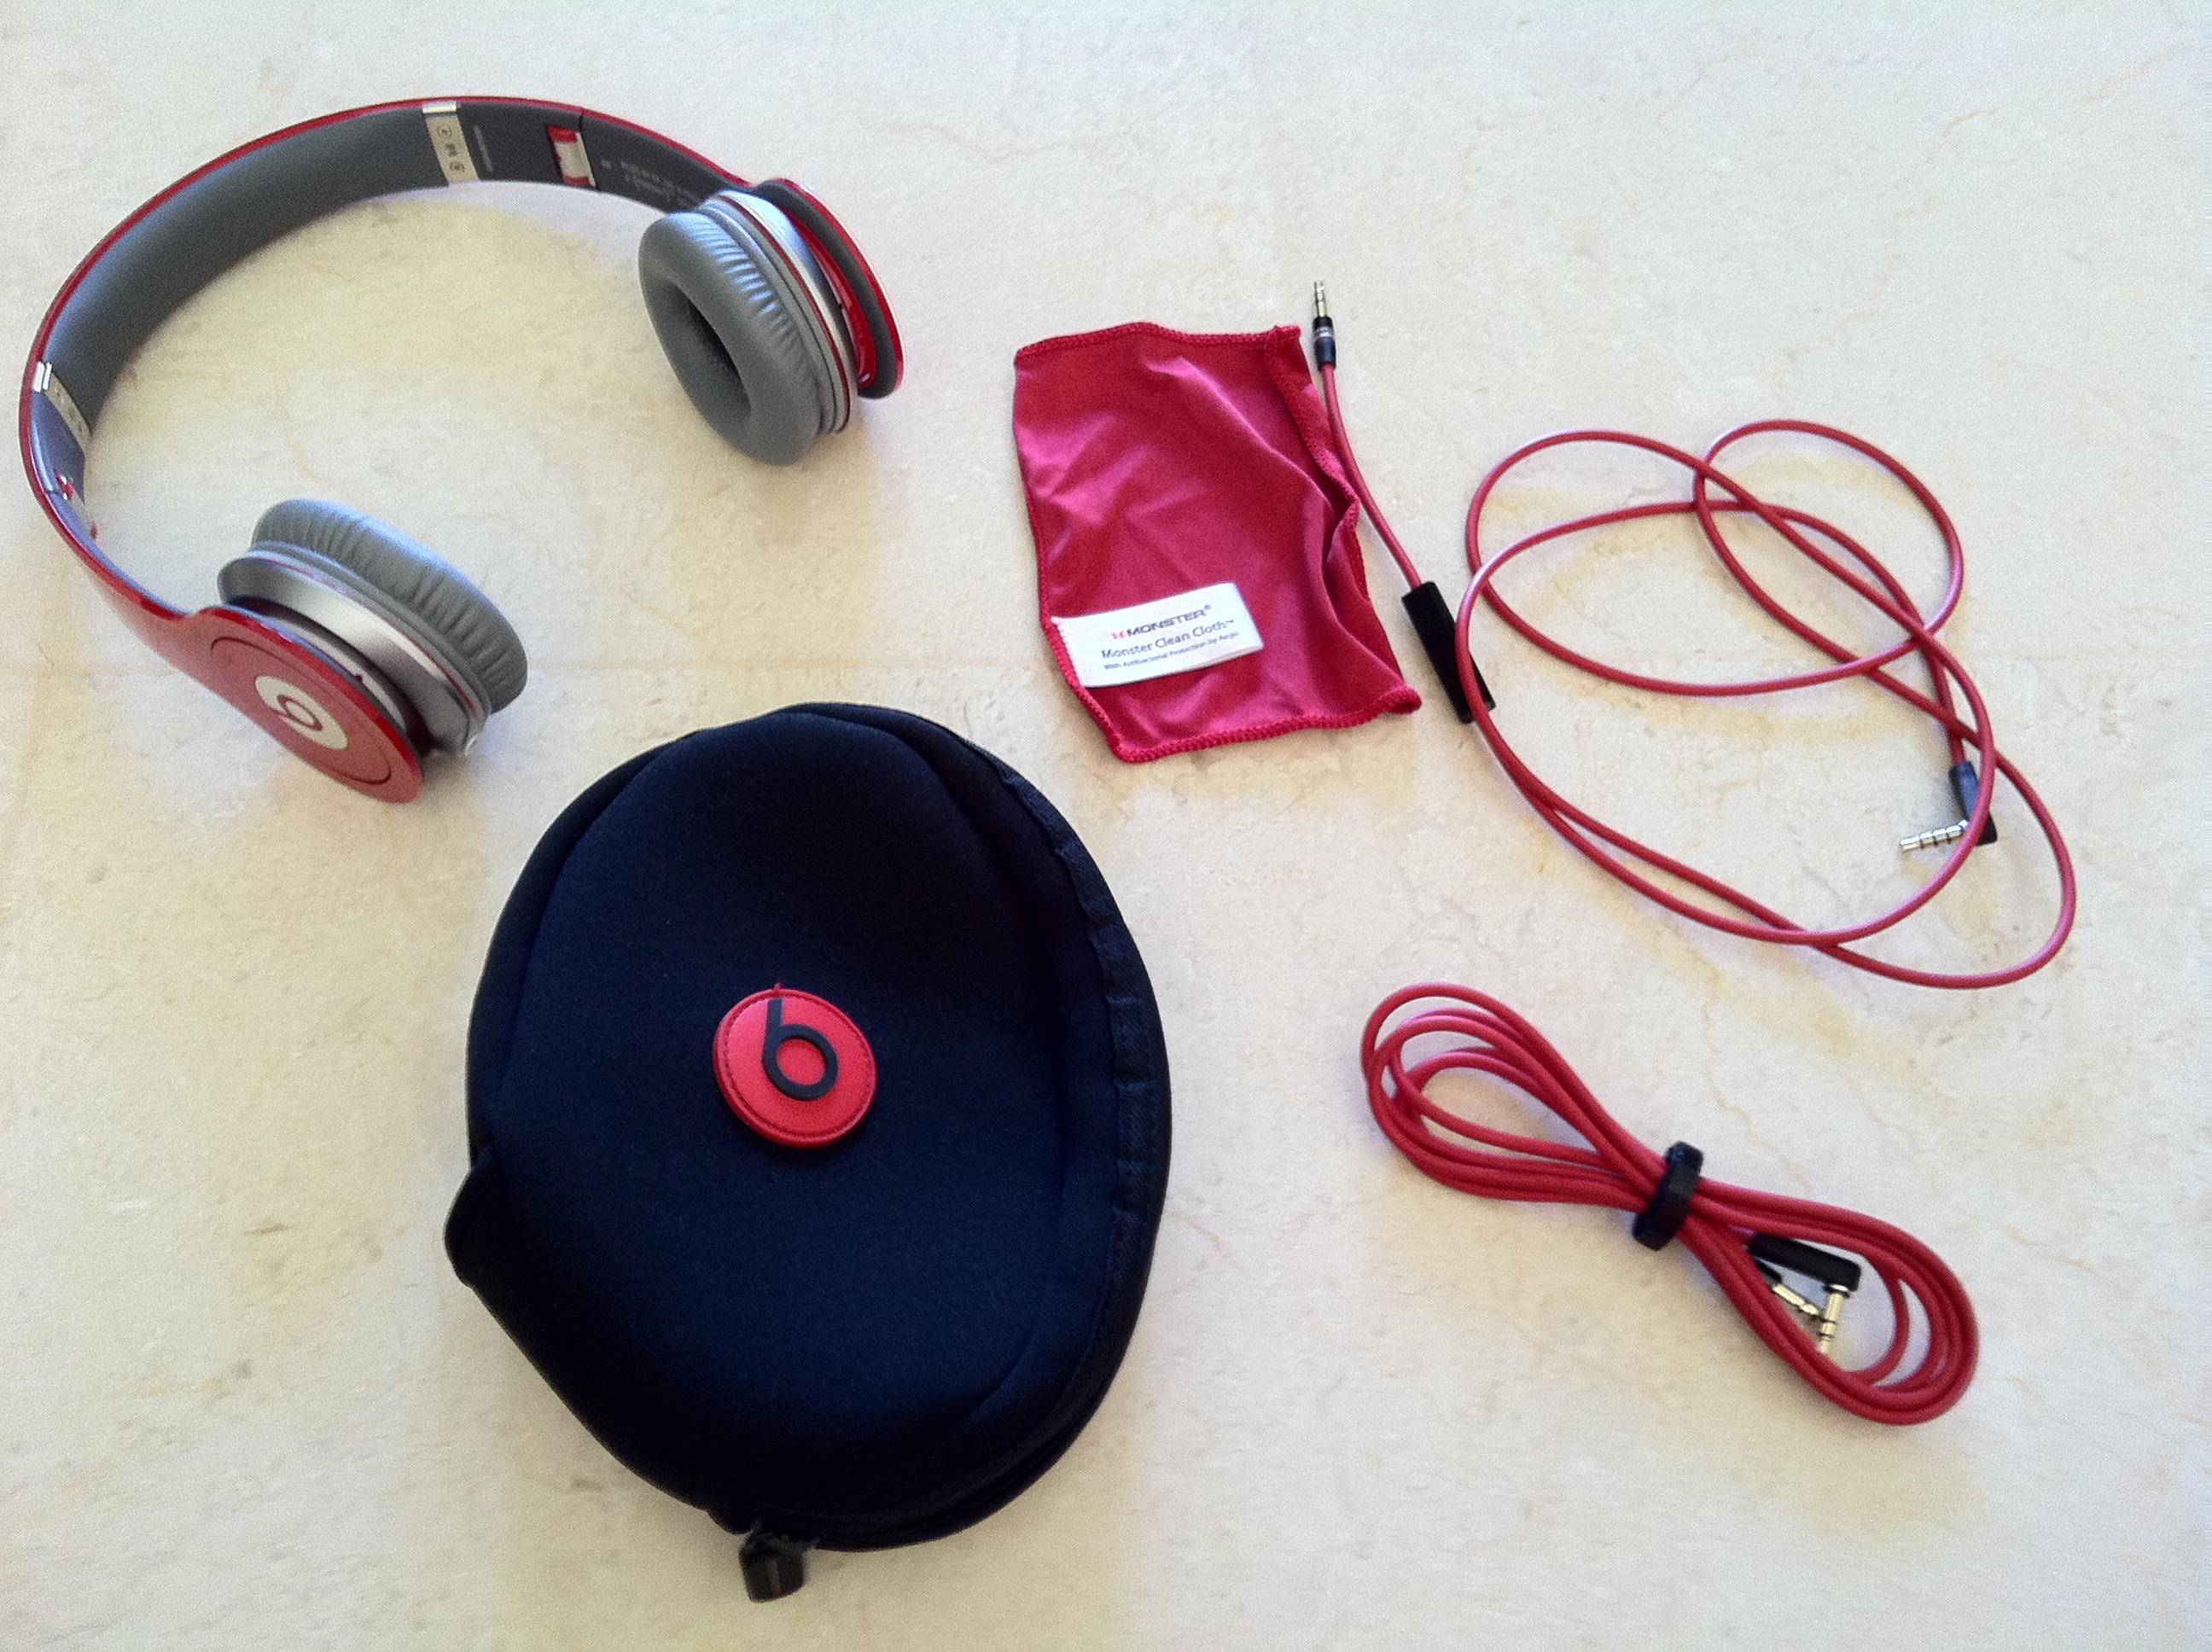 beats by dr dre solo hd red special edition